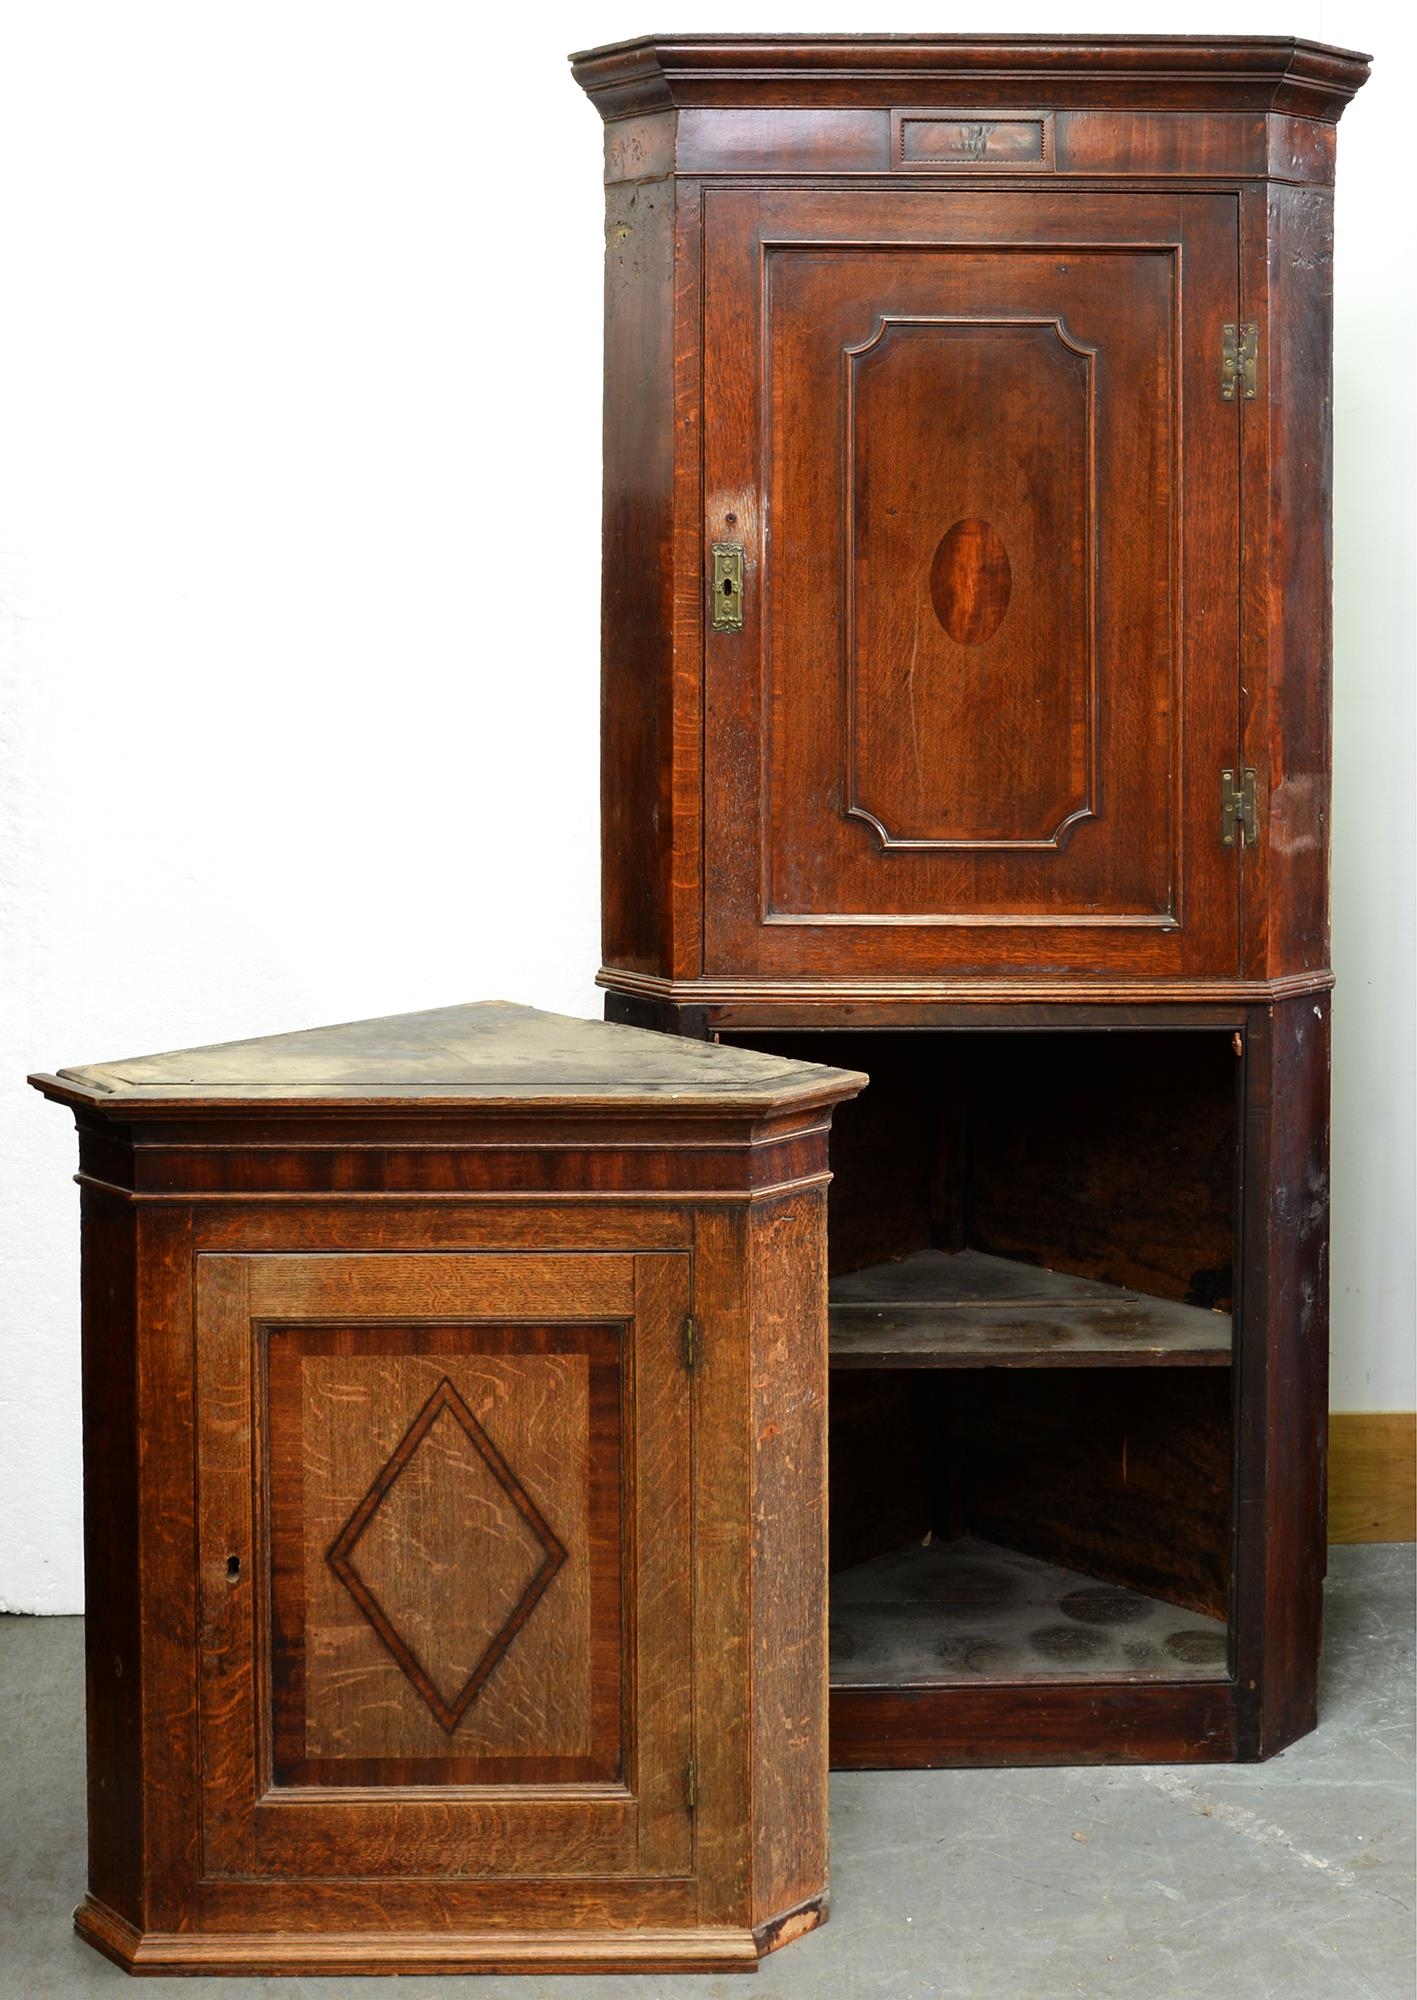 Two George III oak corner cabinets, one on associated base Condition evident from image